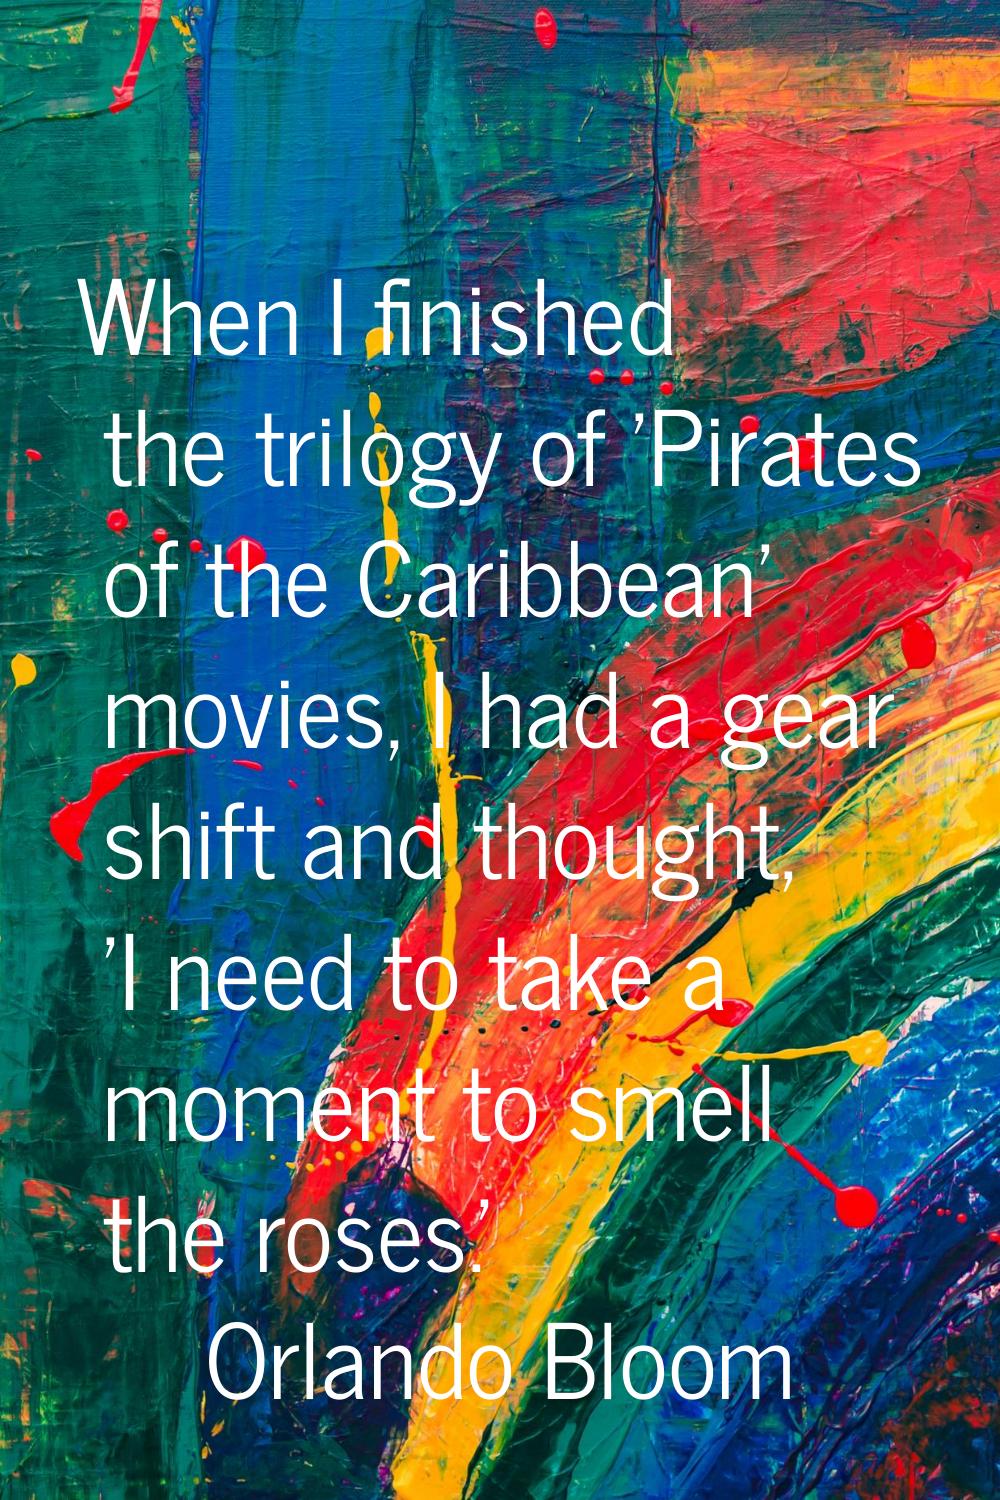 When I finished the trilogy of 'Pirates of the Caribbean' movies, I had a gear shift and thought, '